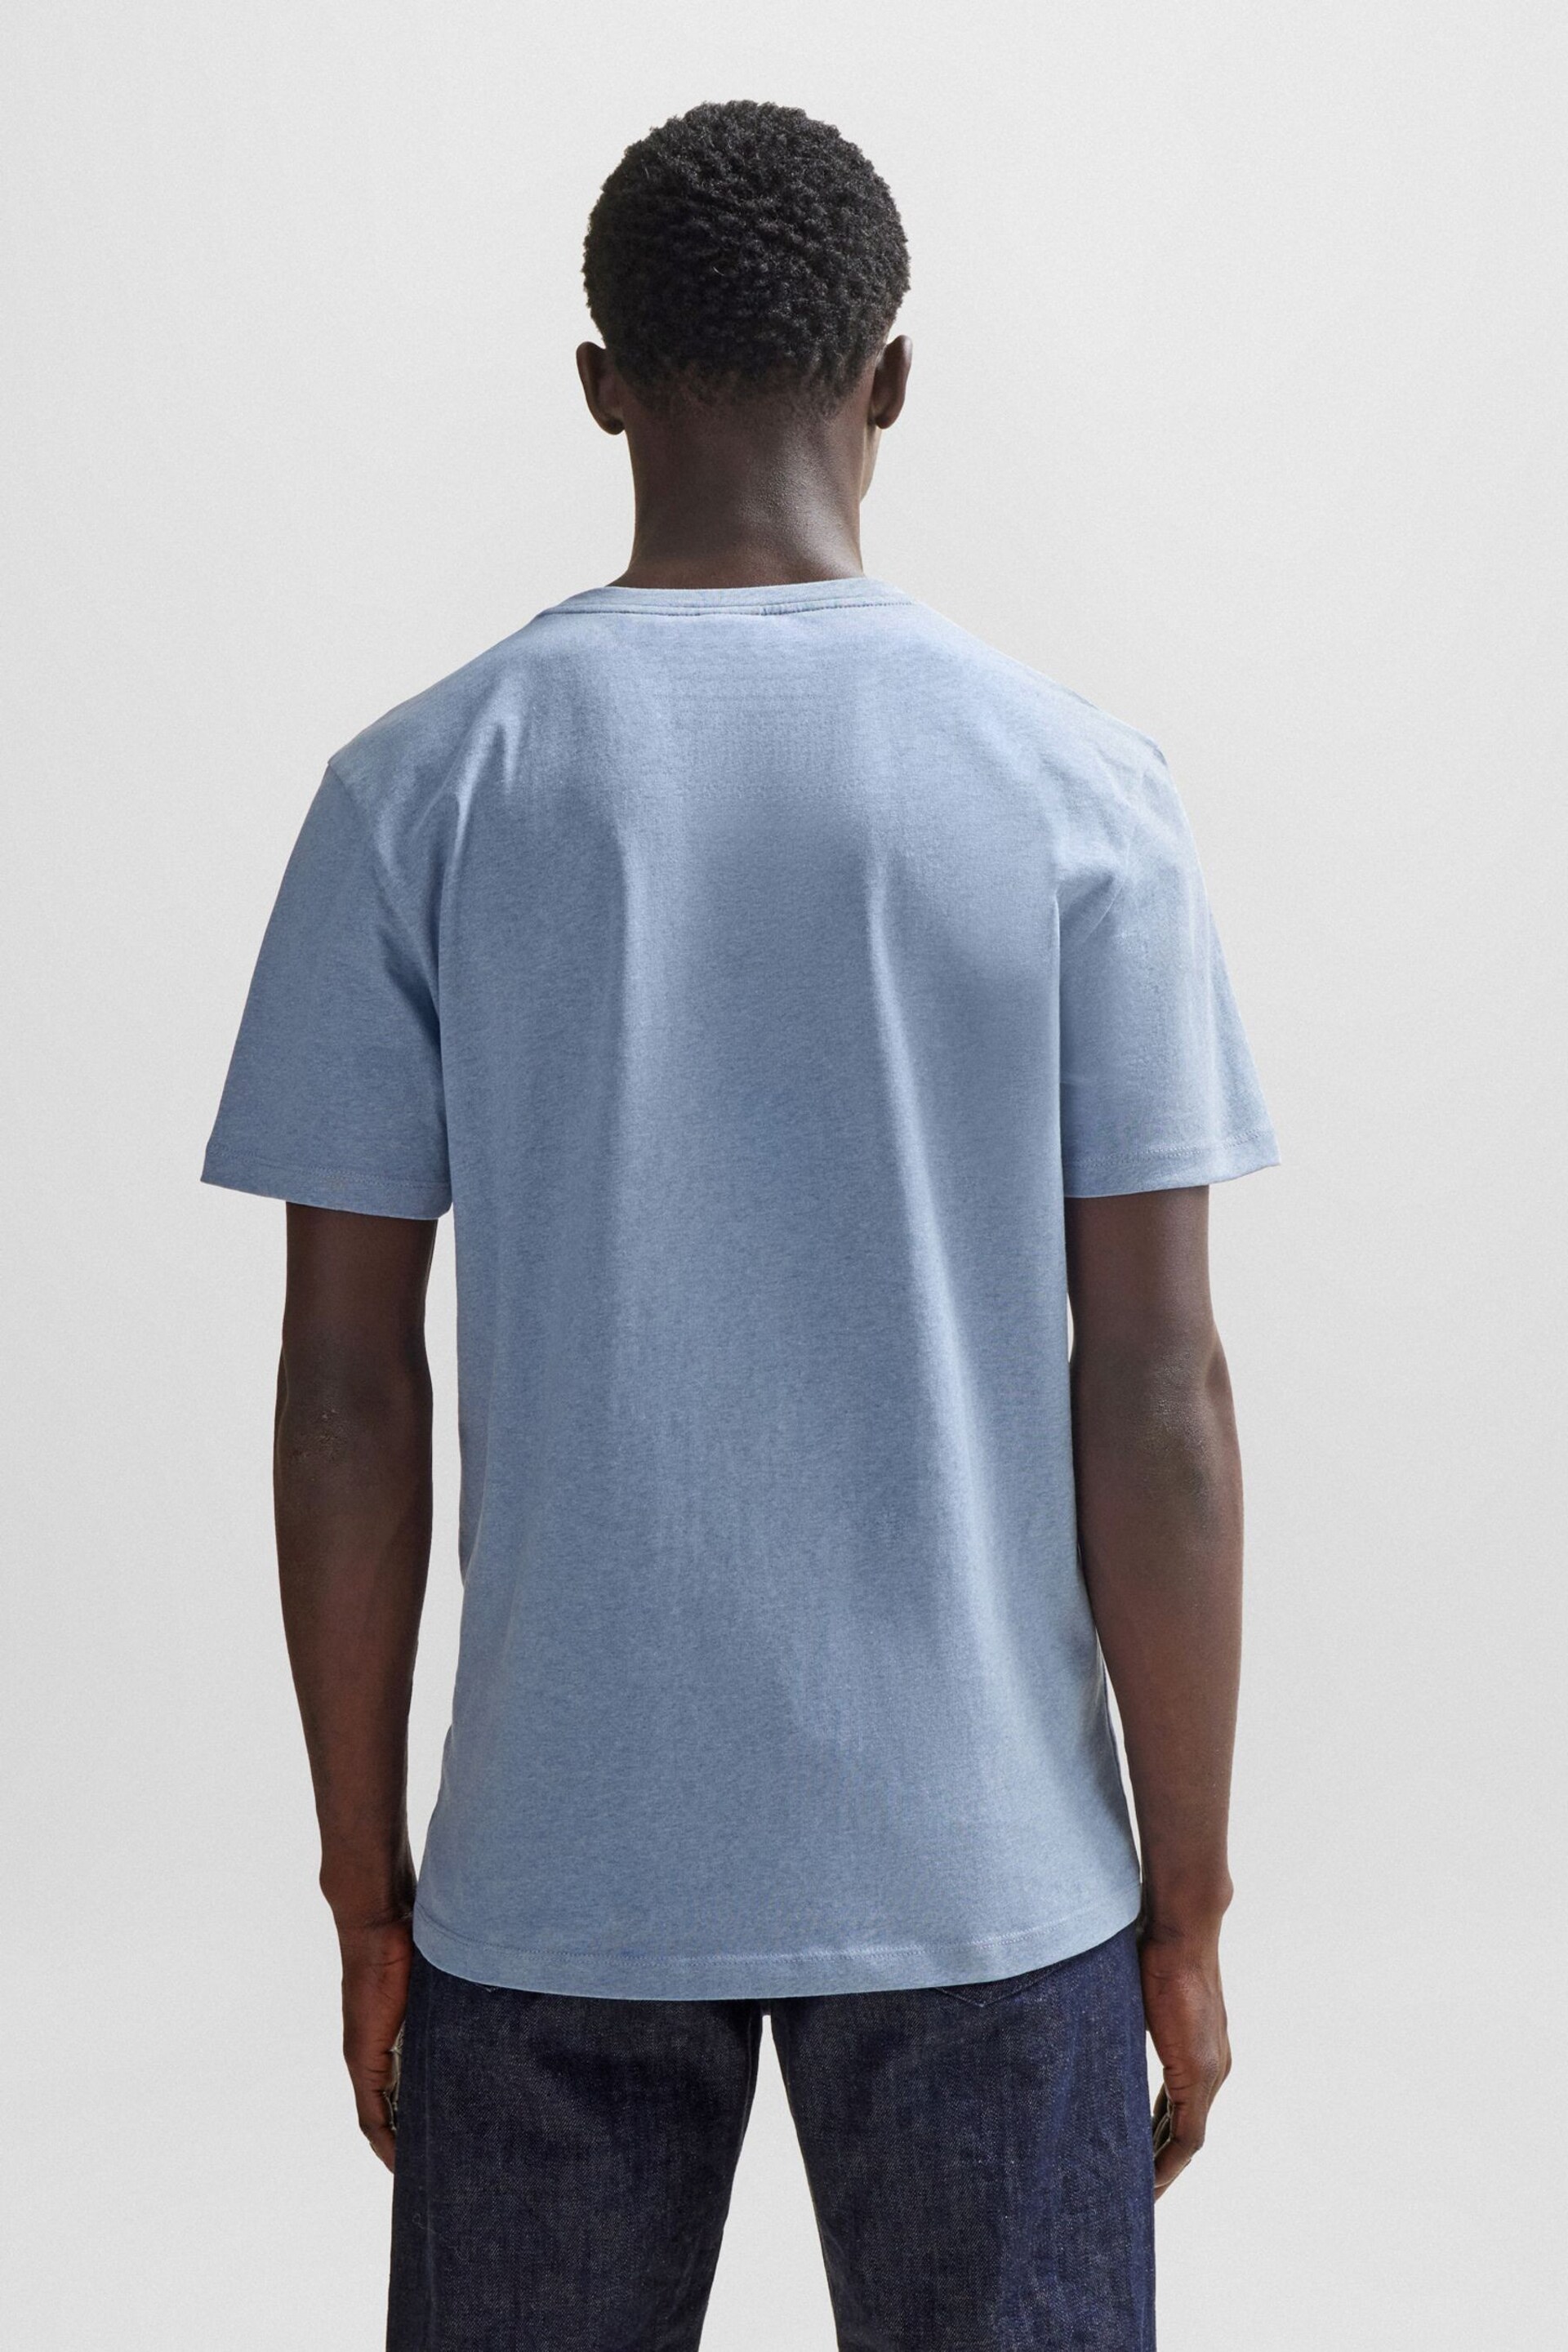 BOSS Blue Relaxed Fit Box Logo T-Shirt - Image 2 of 5